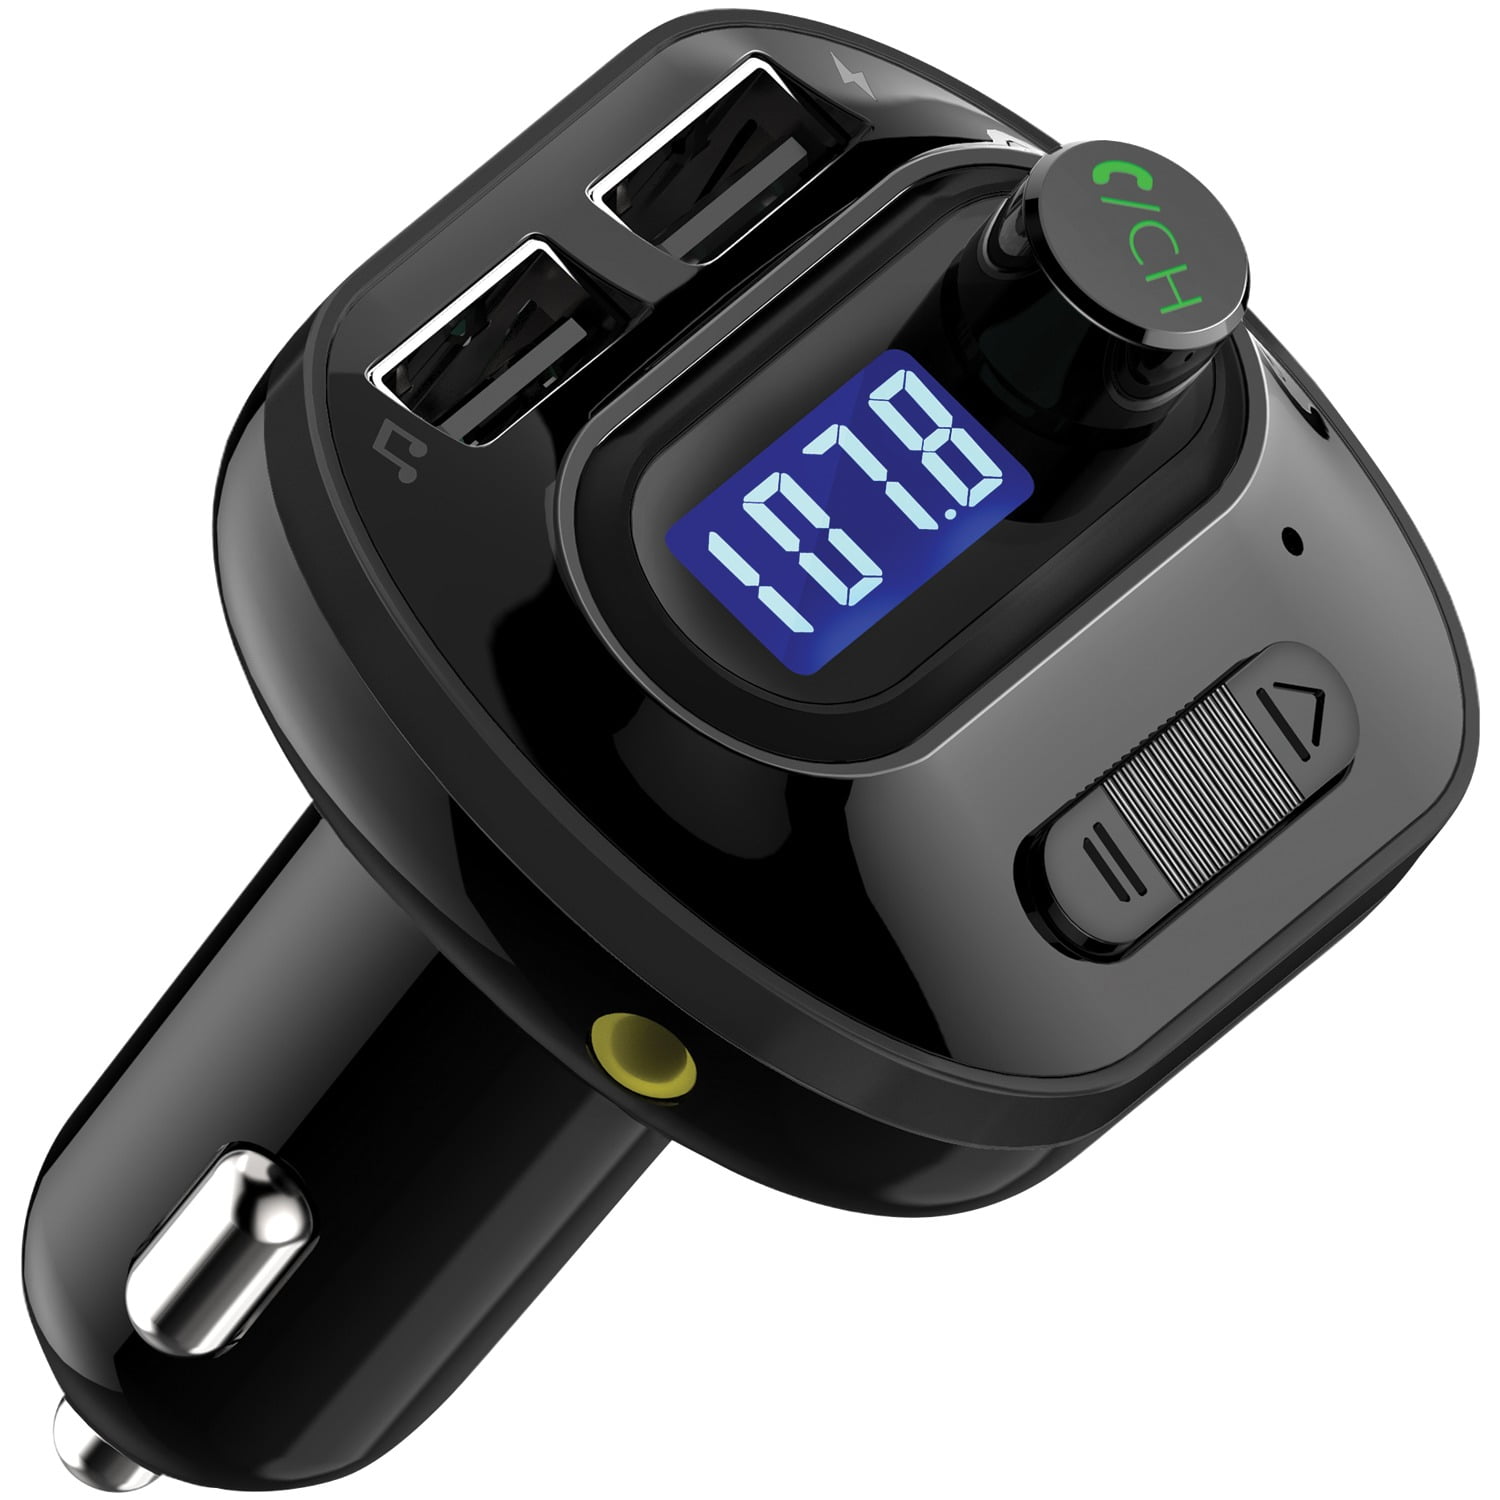 Tralntion T Car Handsfree Wireless Bluetooth Auto Mp3 Player Fm Transmitter Radio Lcd Dual Usb Charger For Cell Phone Mimbarschool Com Ng